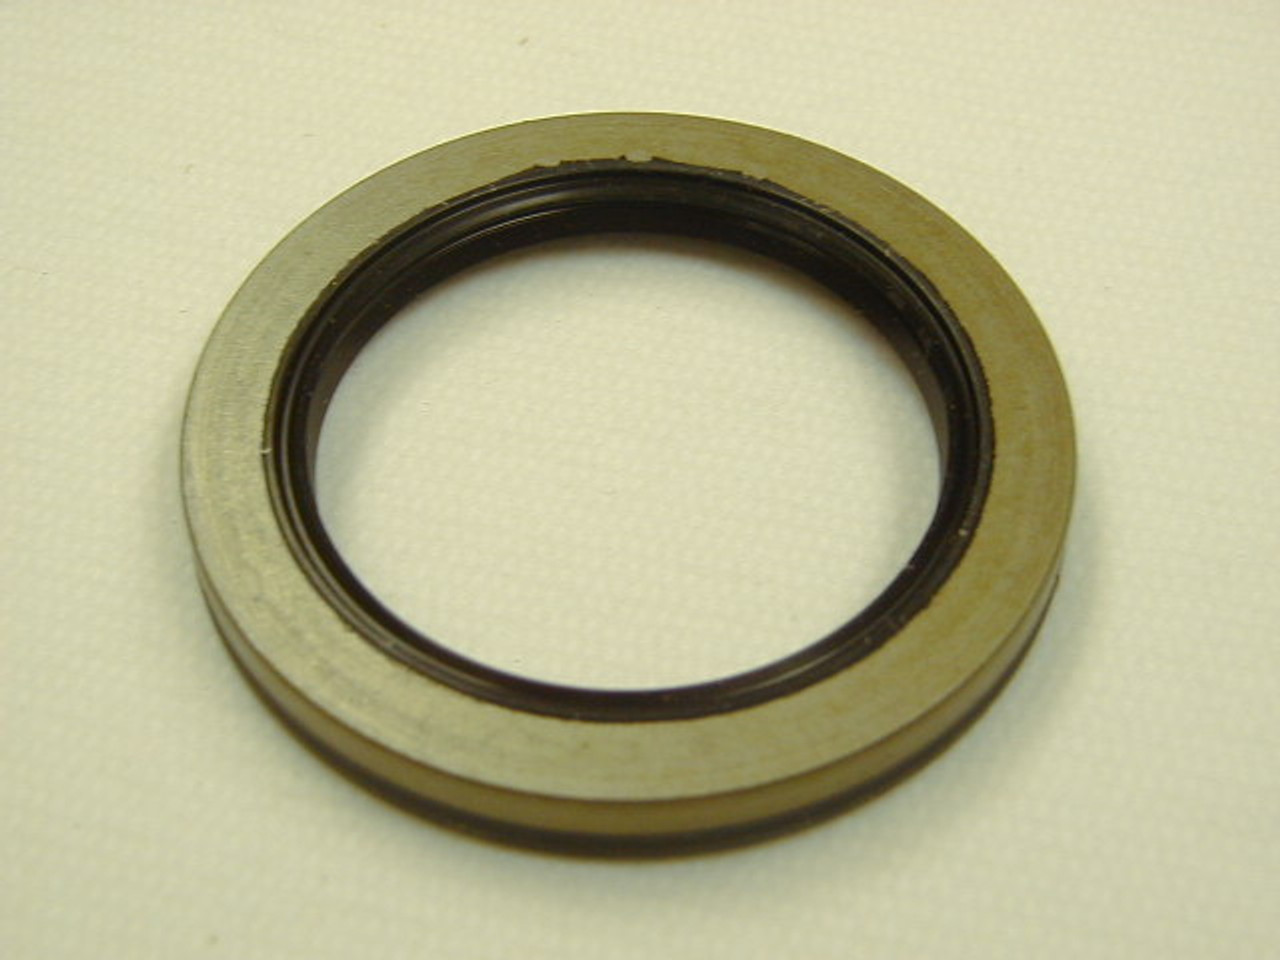 0.250" (6.35mm) Inch Metal Double Lip Nitrile Grease Seal  2452 HMA14 V